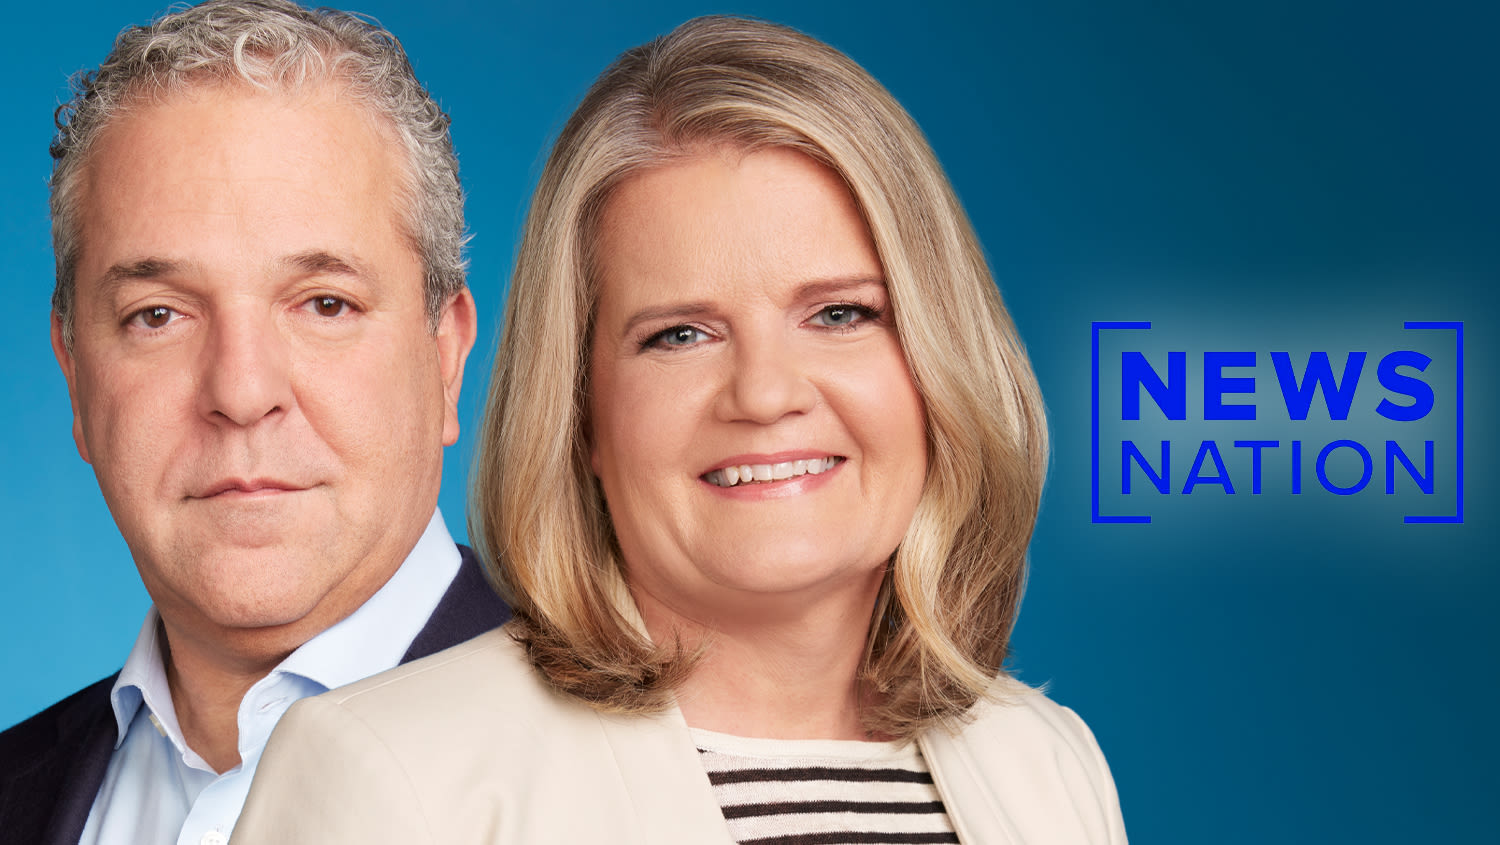 NewsNation Names Cherie Grzech As President Of News & Politics; Michael Corn To Lead Programming And Specials